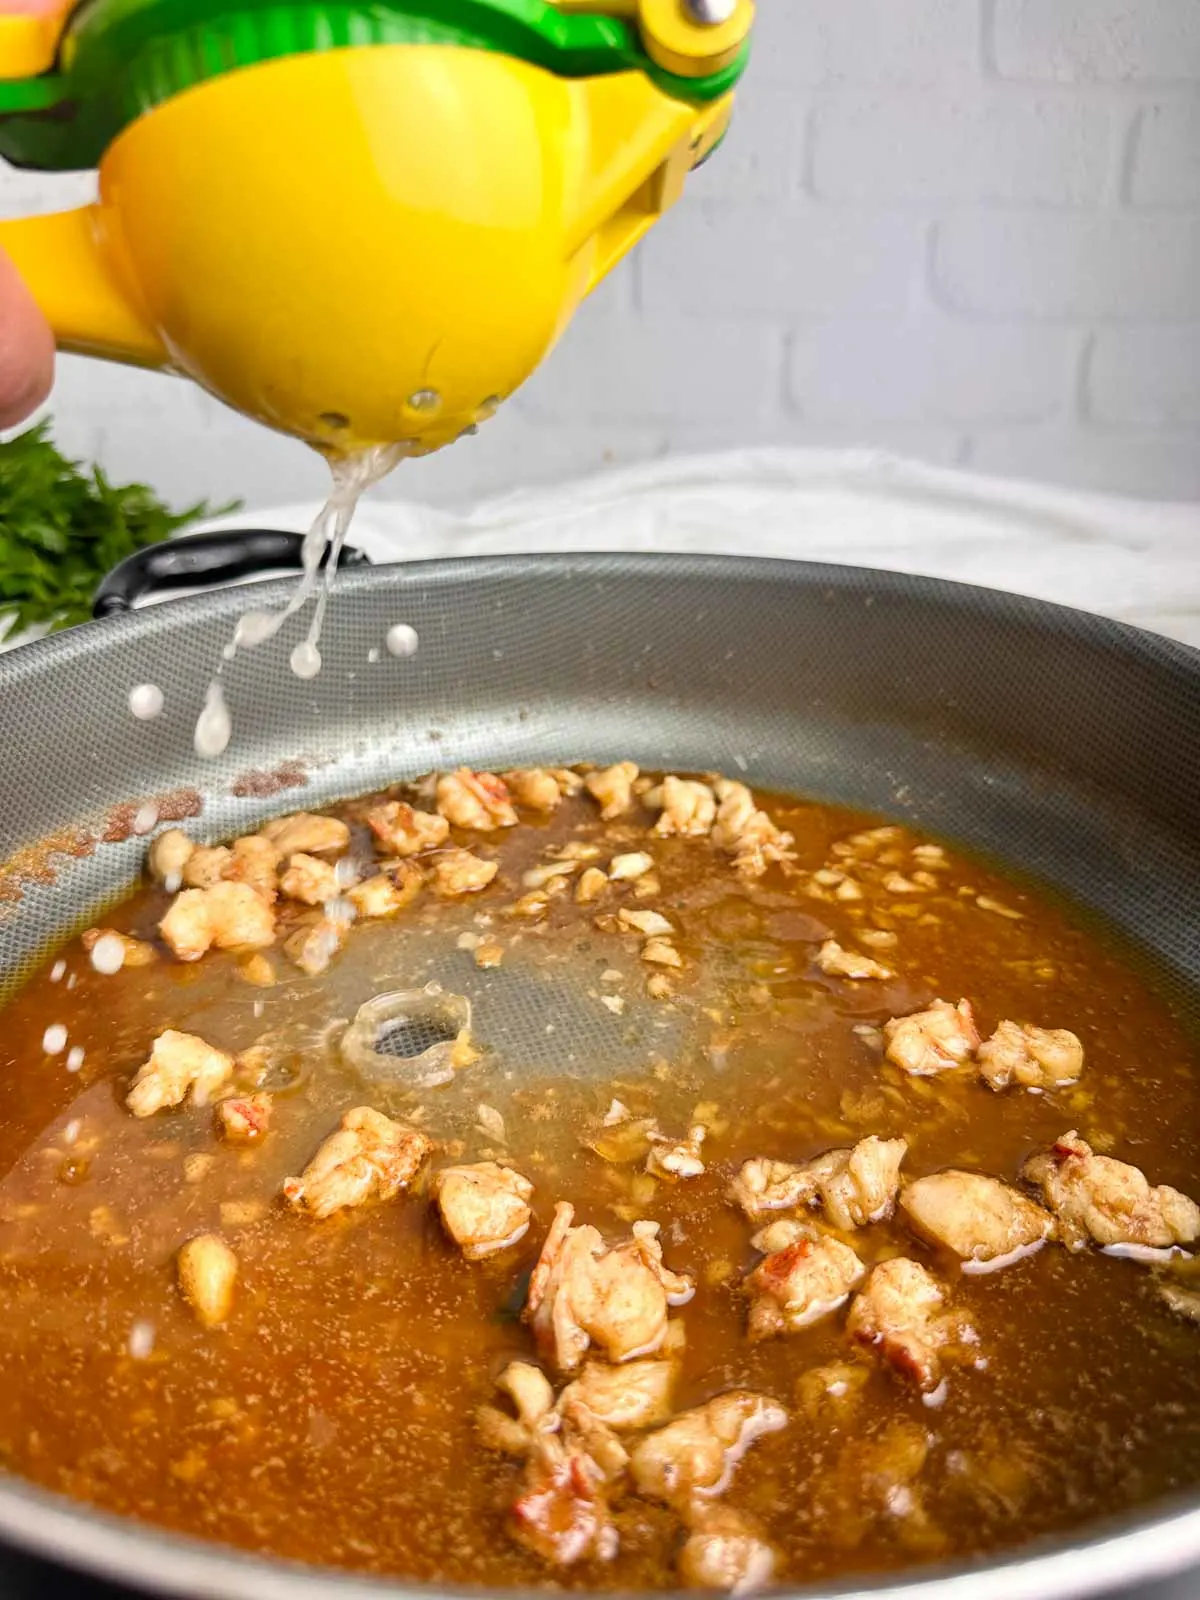 Squeeze lemon juice into the pan with the brown butter and lobster meat.